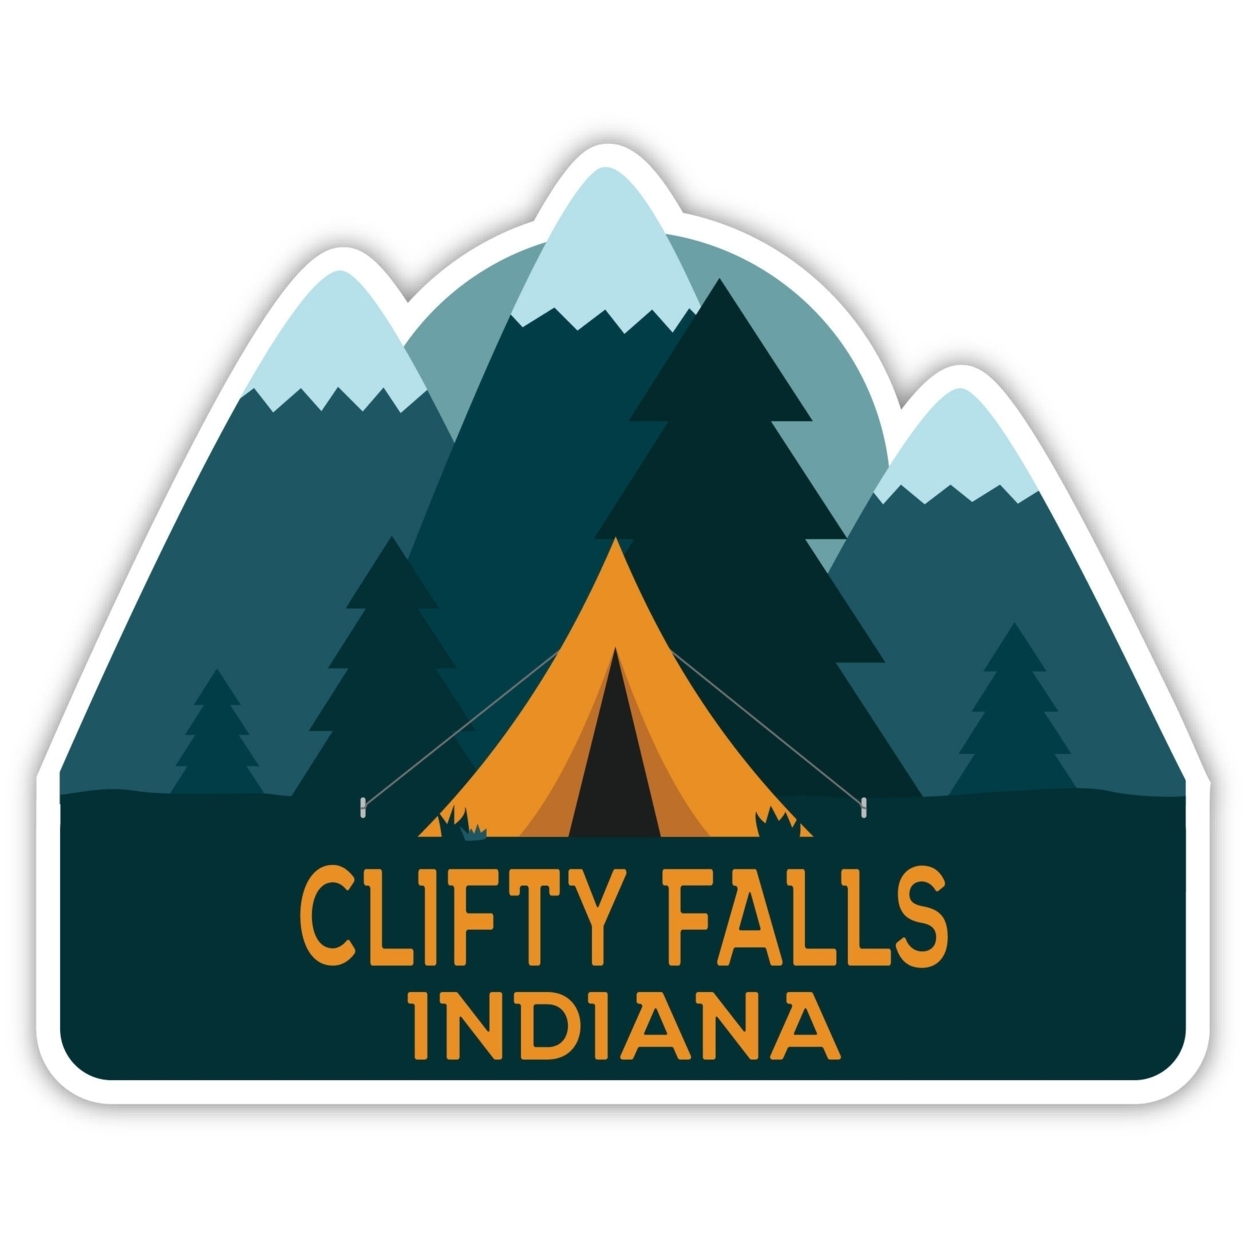 Clifty Falls Indiana Souvenir Decorative Stickers (Choose Theme And Size) - 4-Pack, 8-Inch, Tent